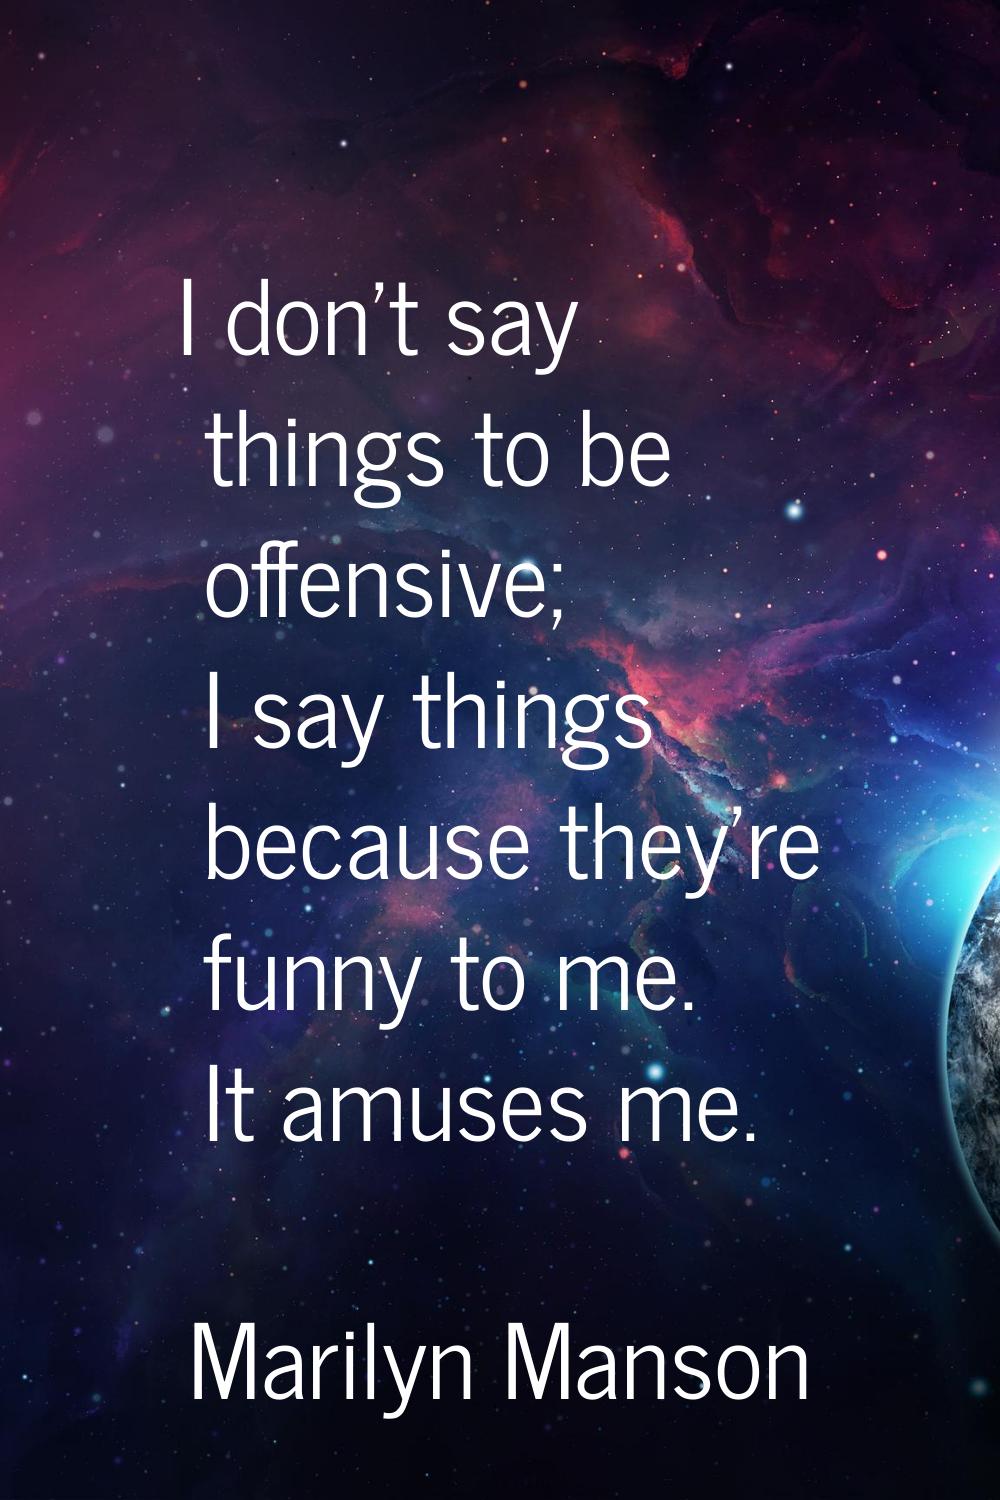 I don't say things to be offensive; I say things because they're funny to me. It amuses me.